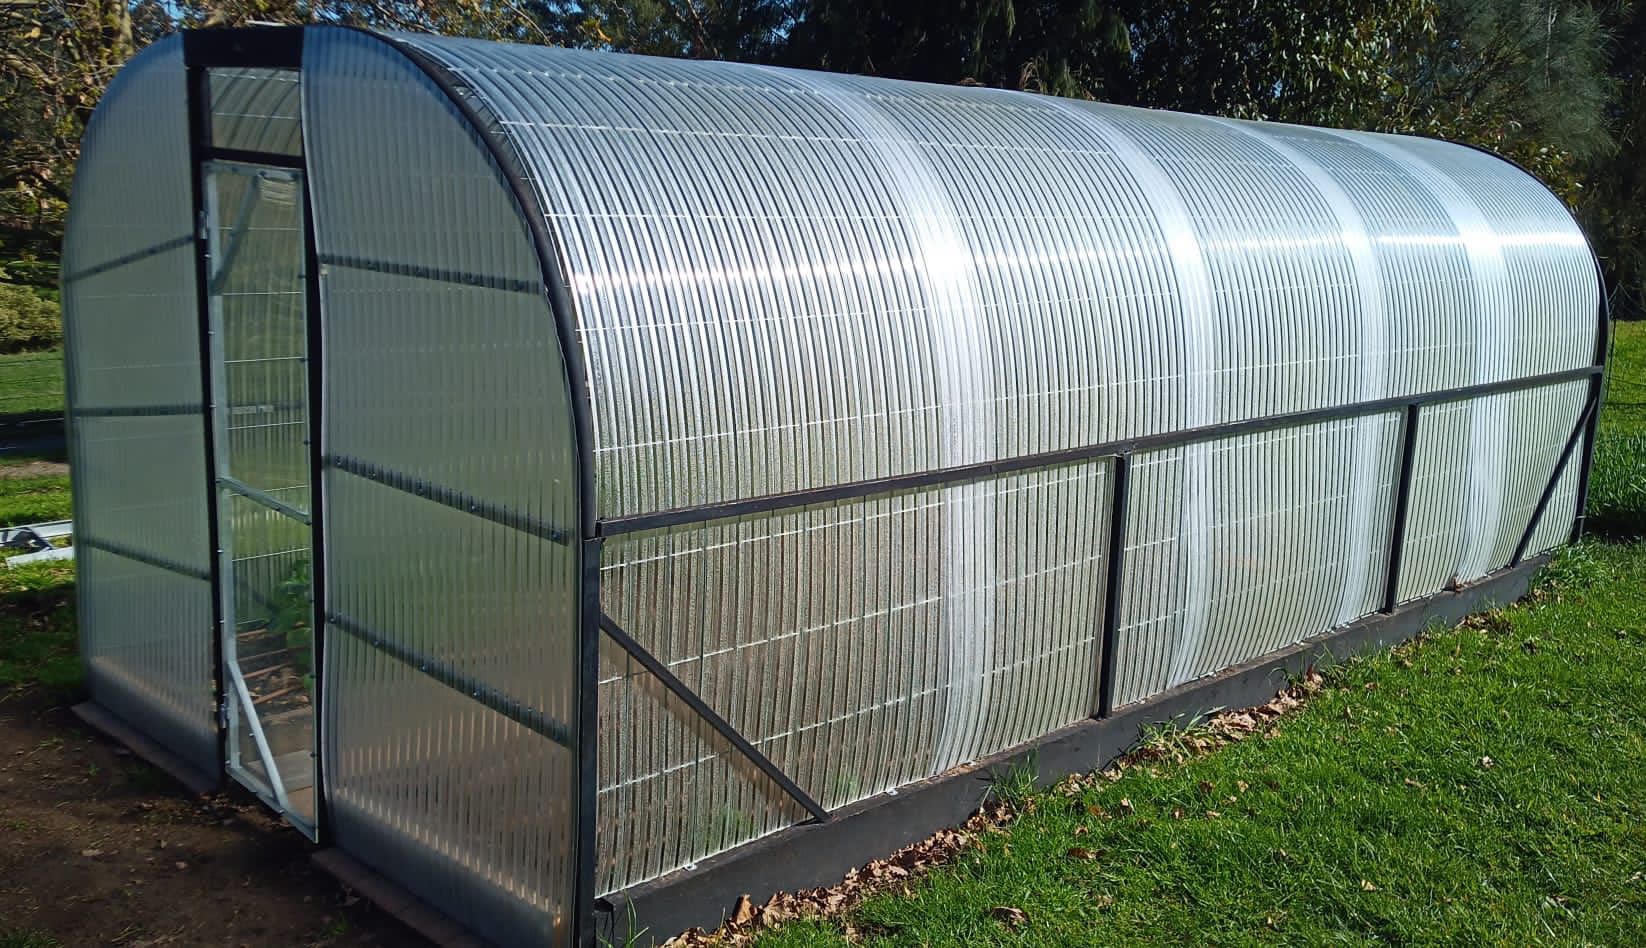 Polycarbonate corrugated and embossed sheet for greenhouse